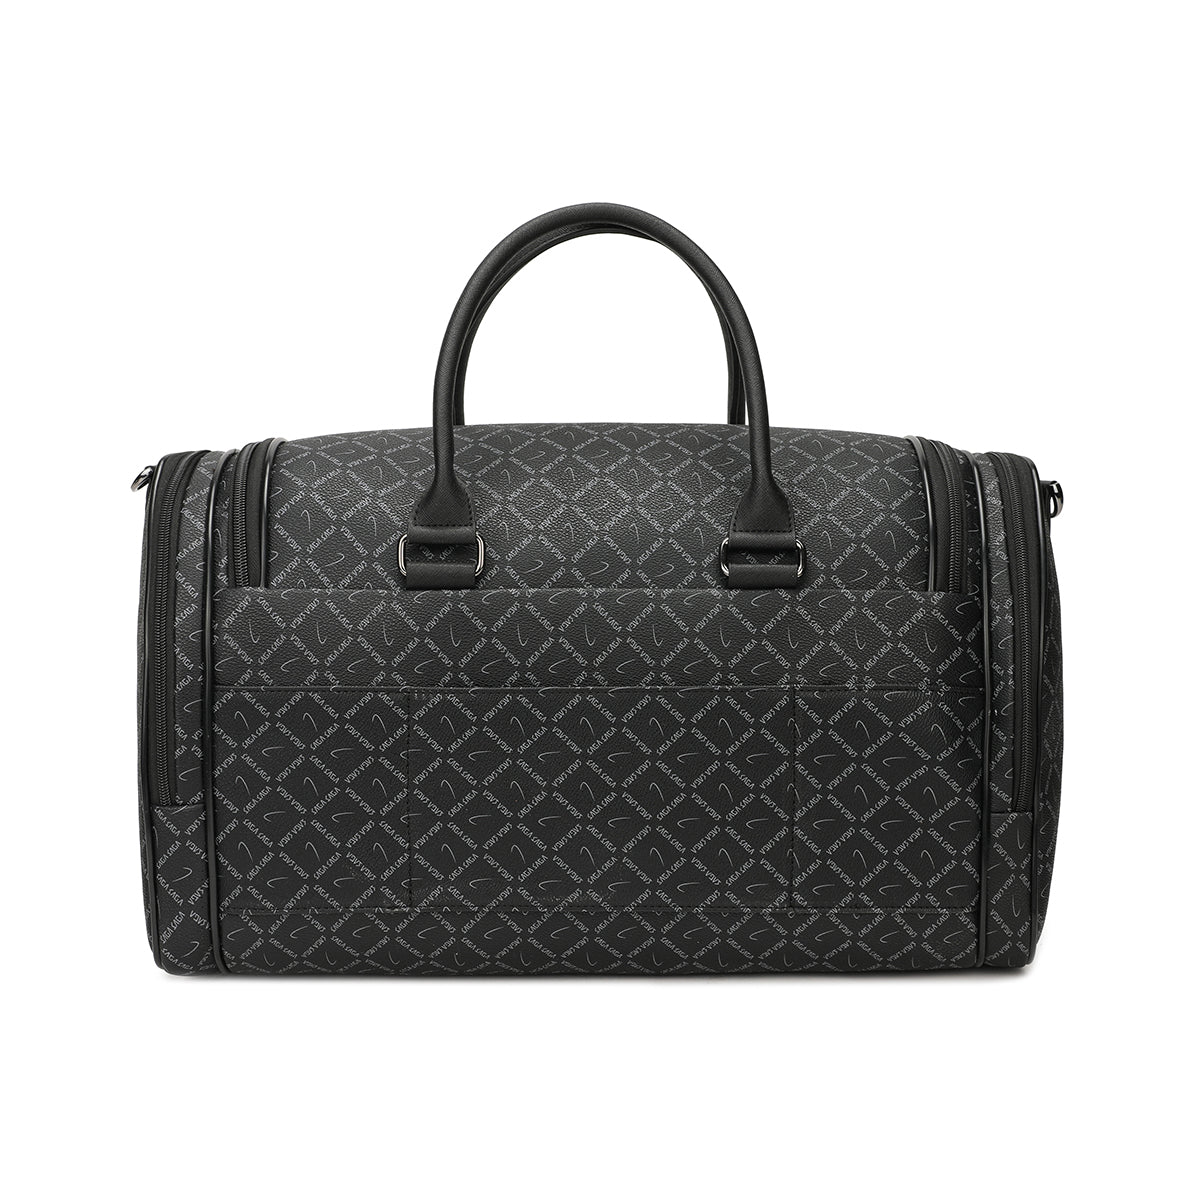 Luxurious travel bag in several sizes, gray color